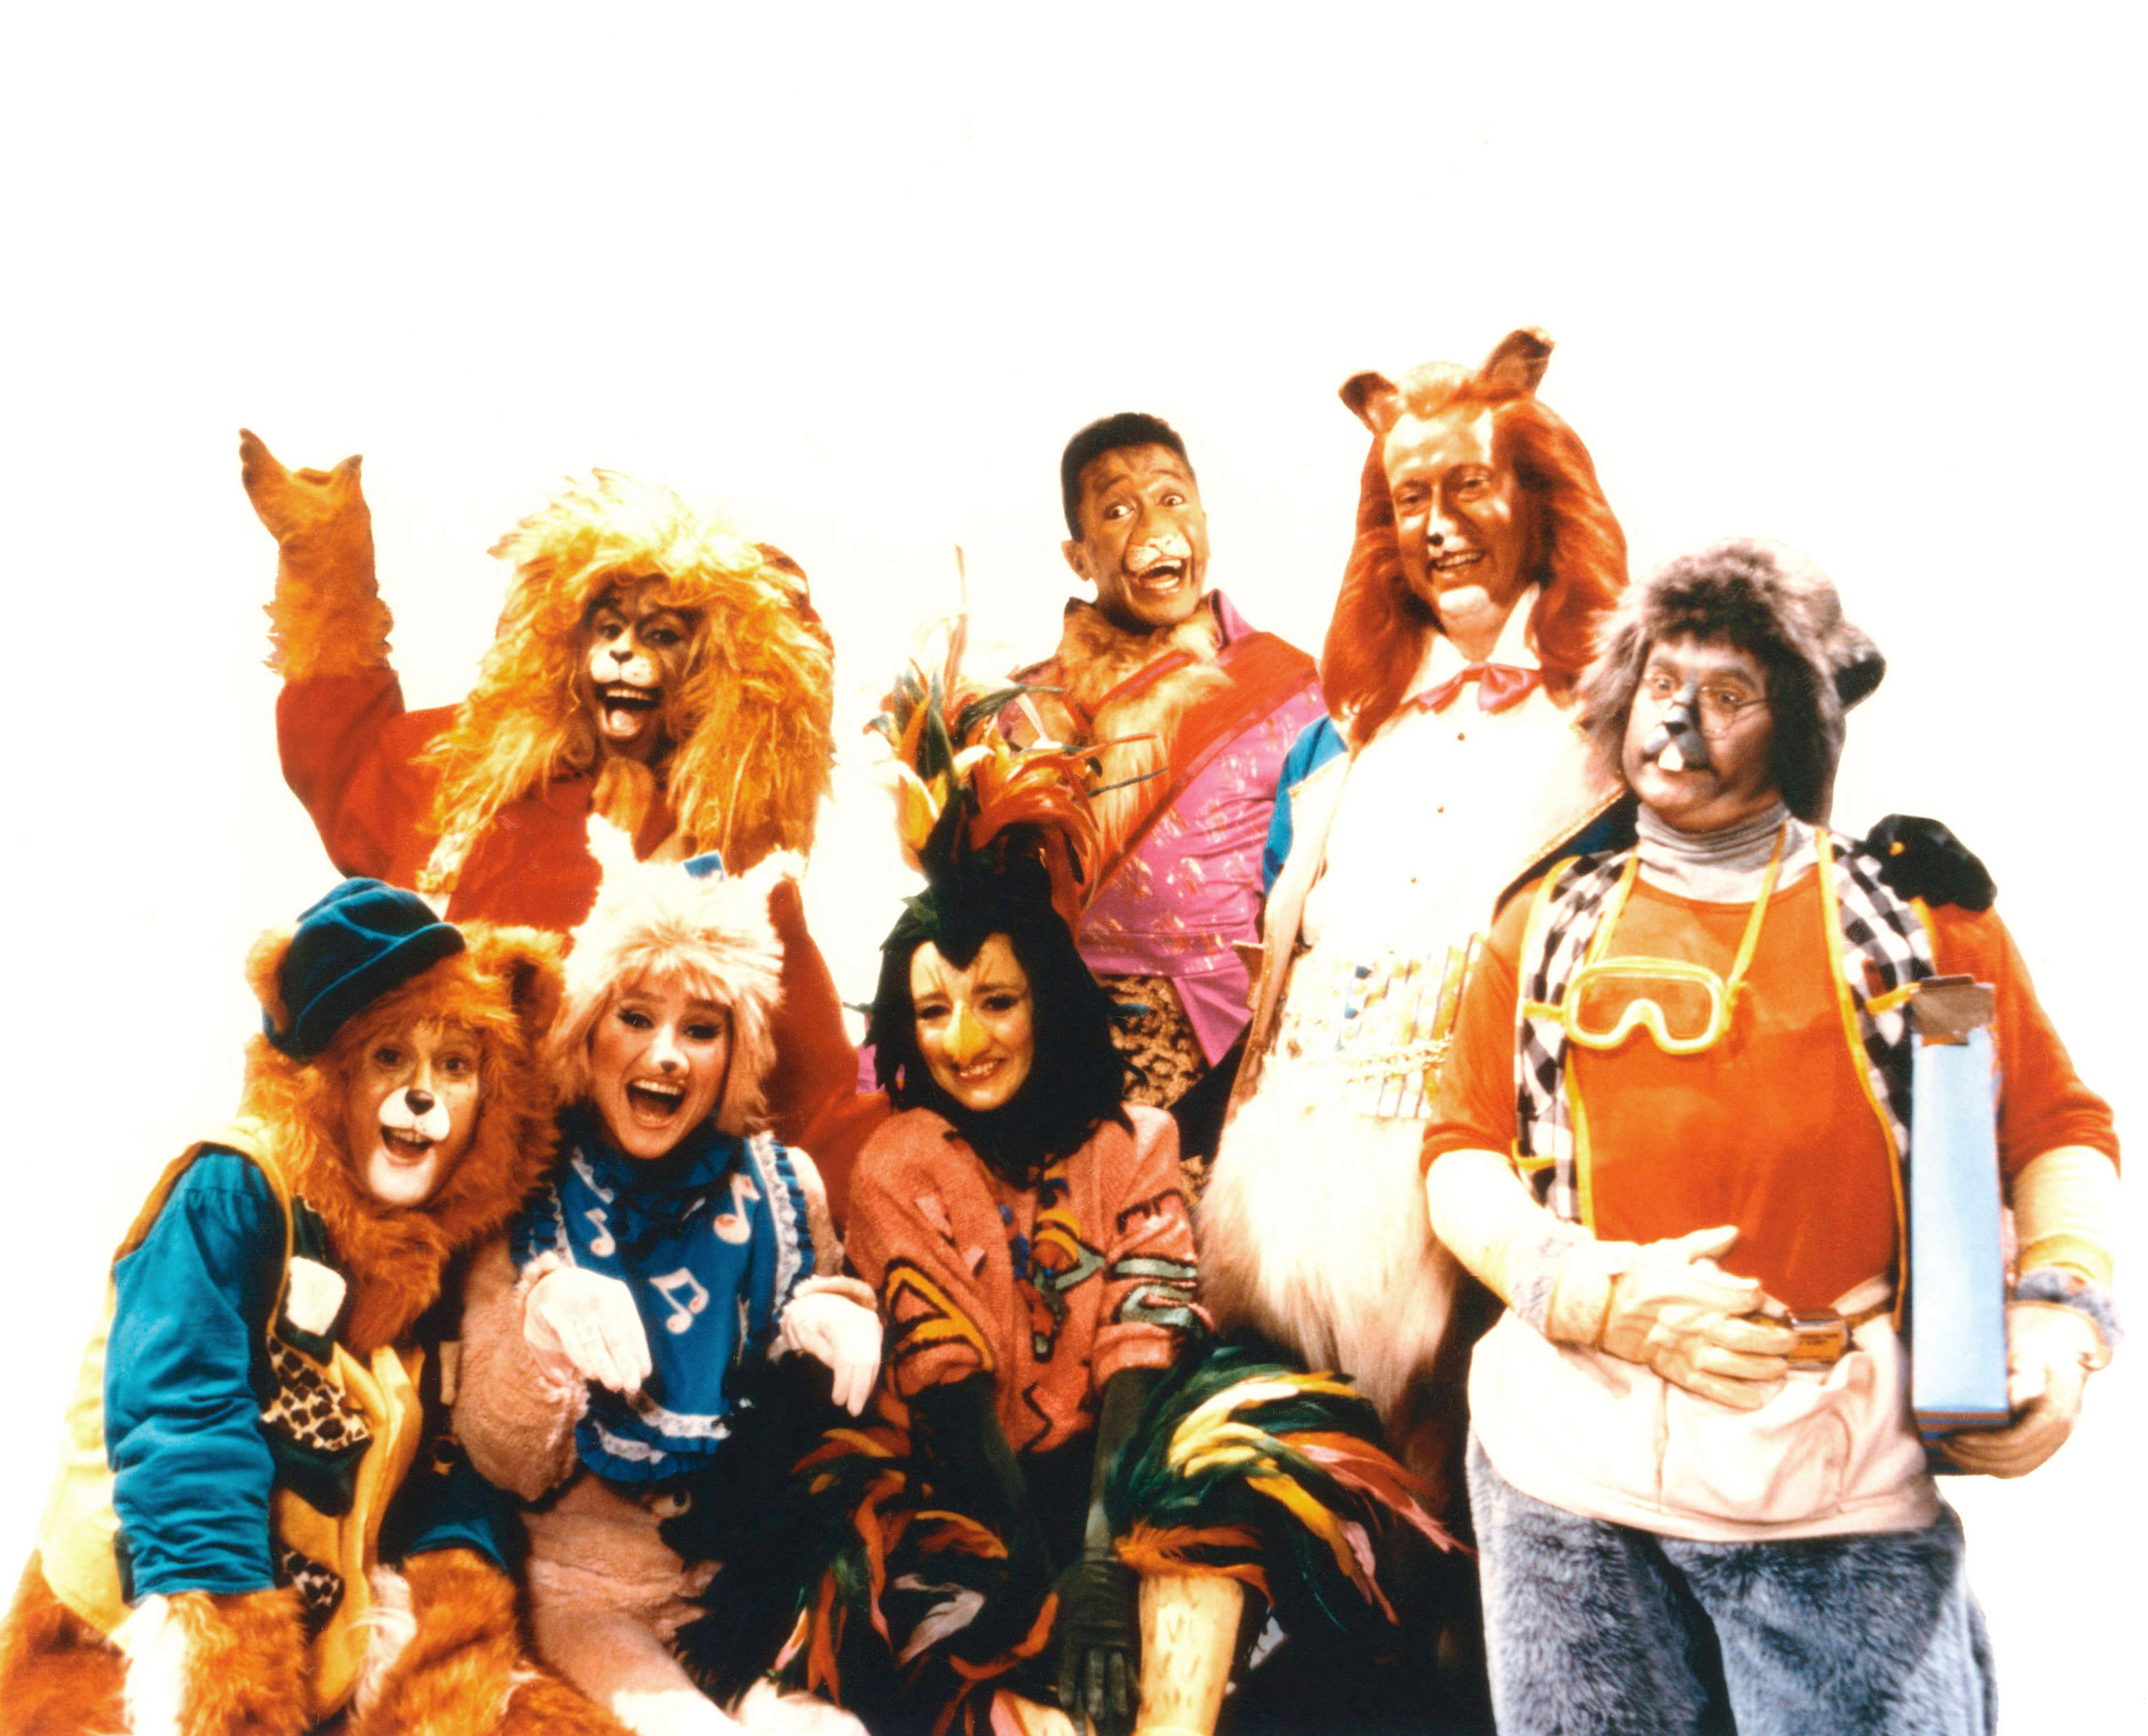 cast dressed in various amimal costumes